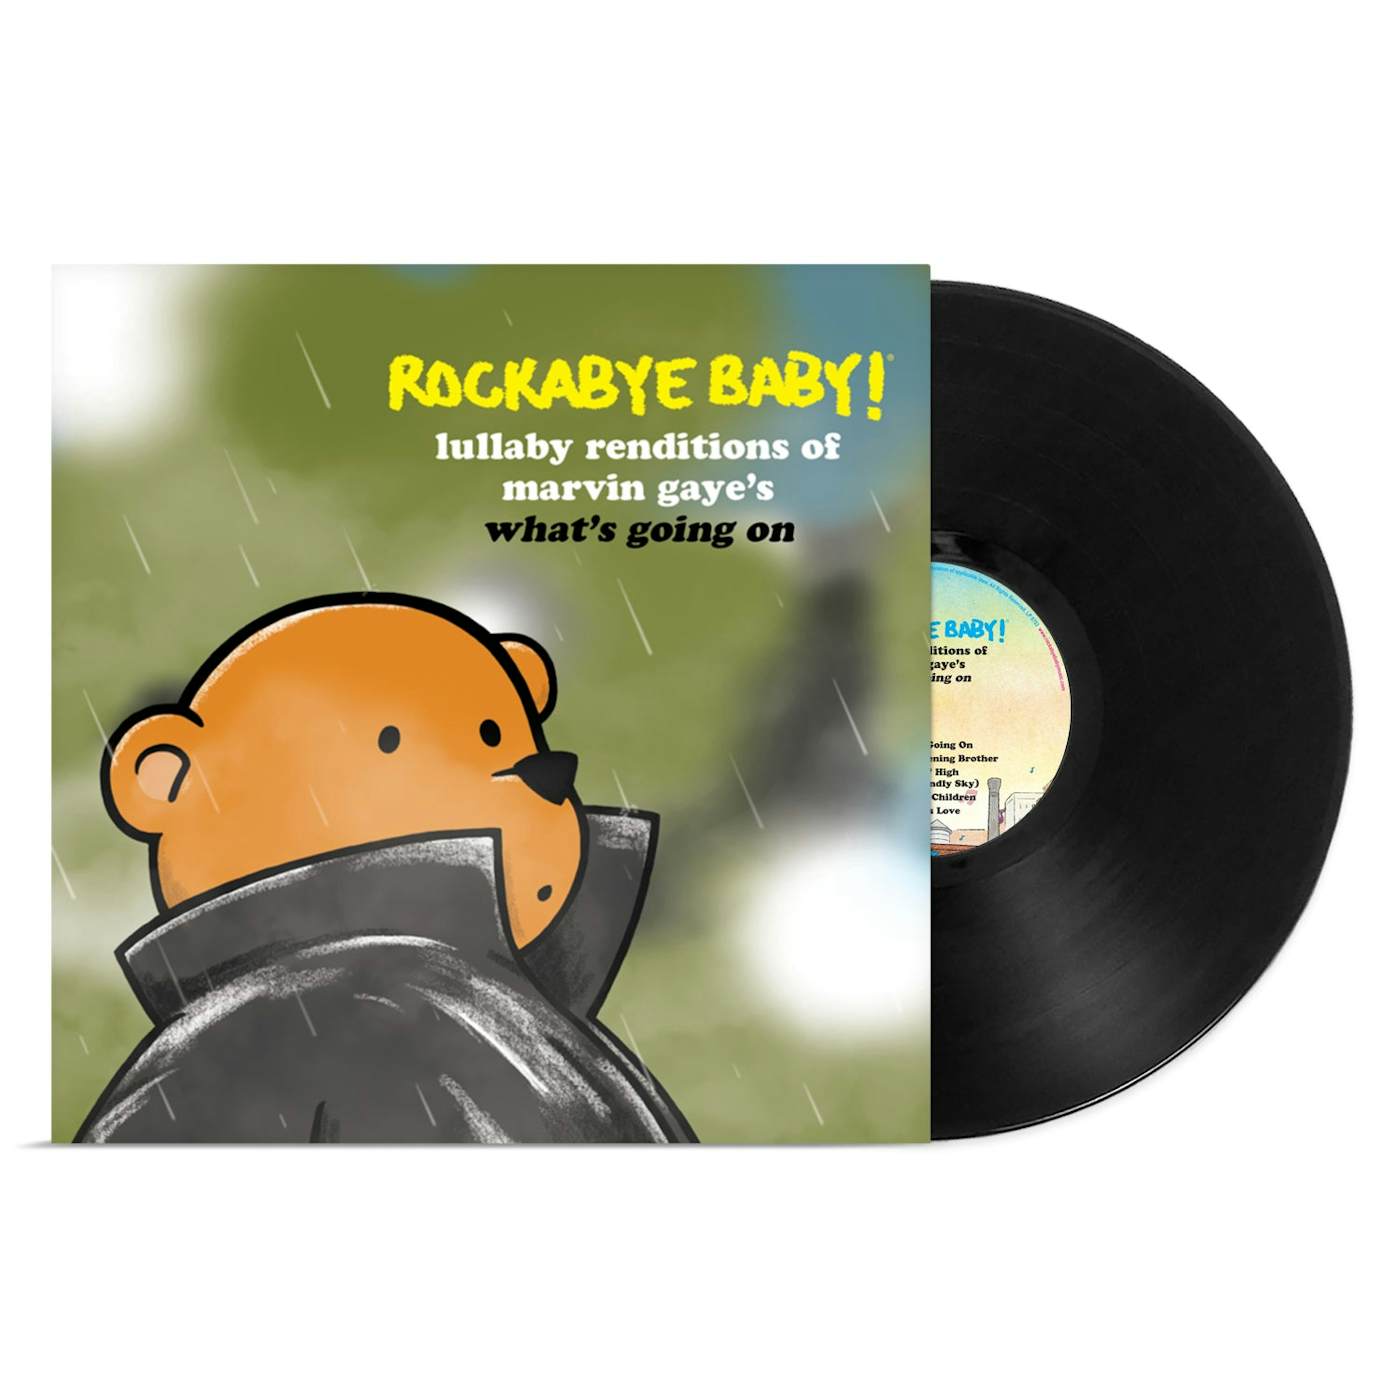 Rockabye Baby! Lullaby Renditions of Marvin Gaye's What's Going On - Vinyl